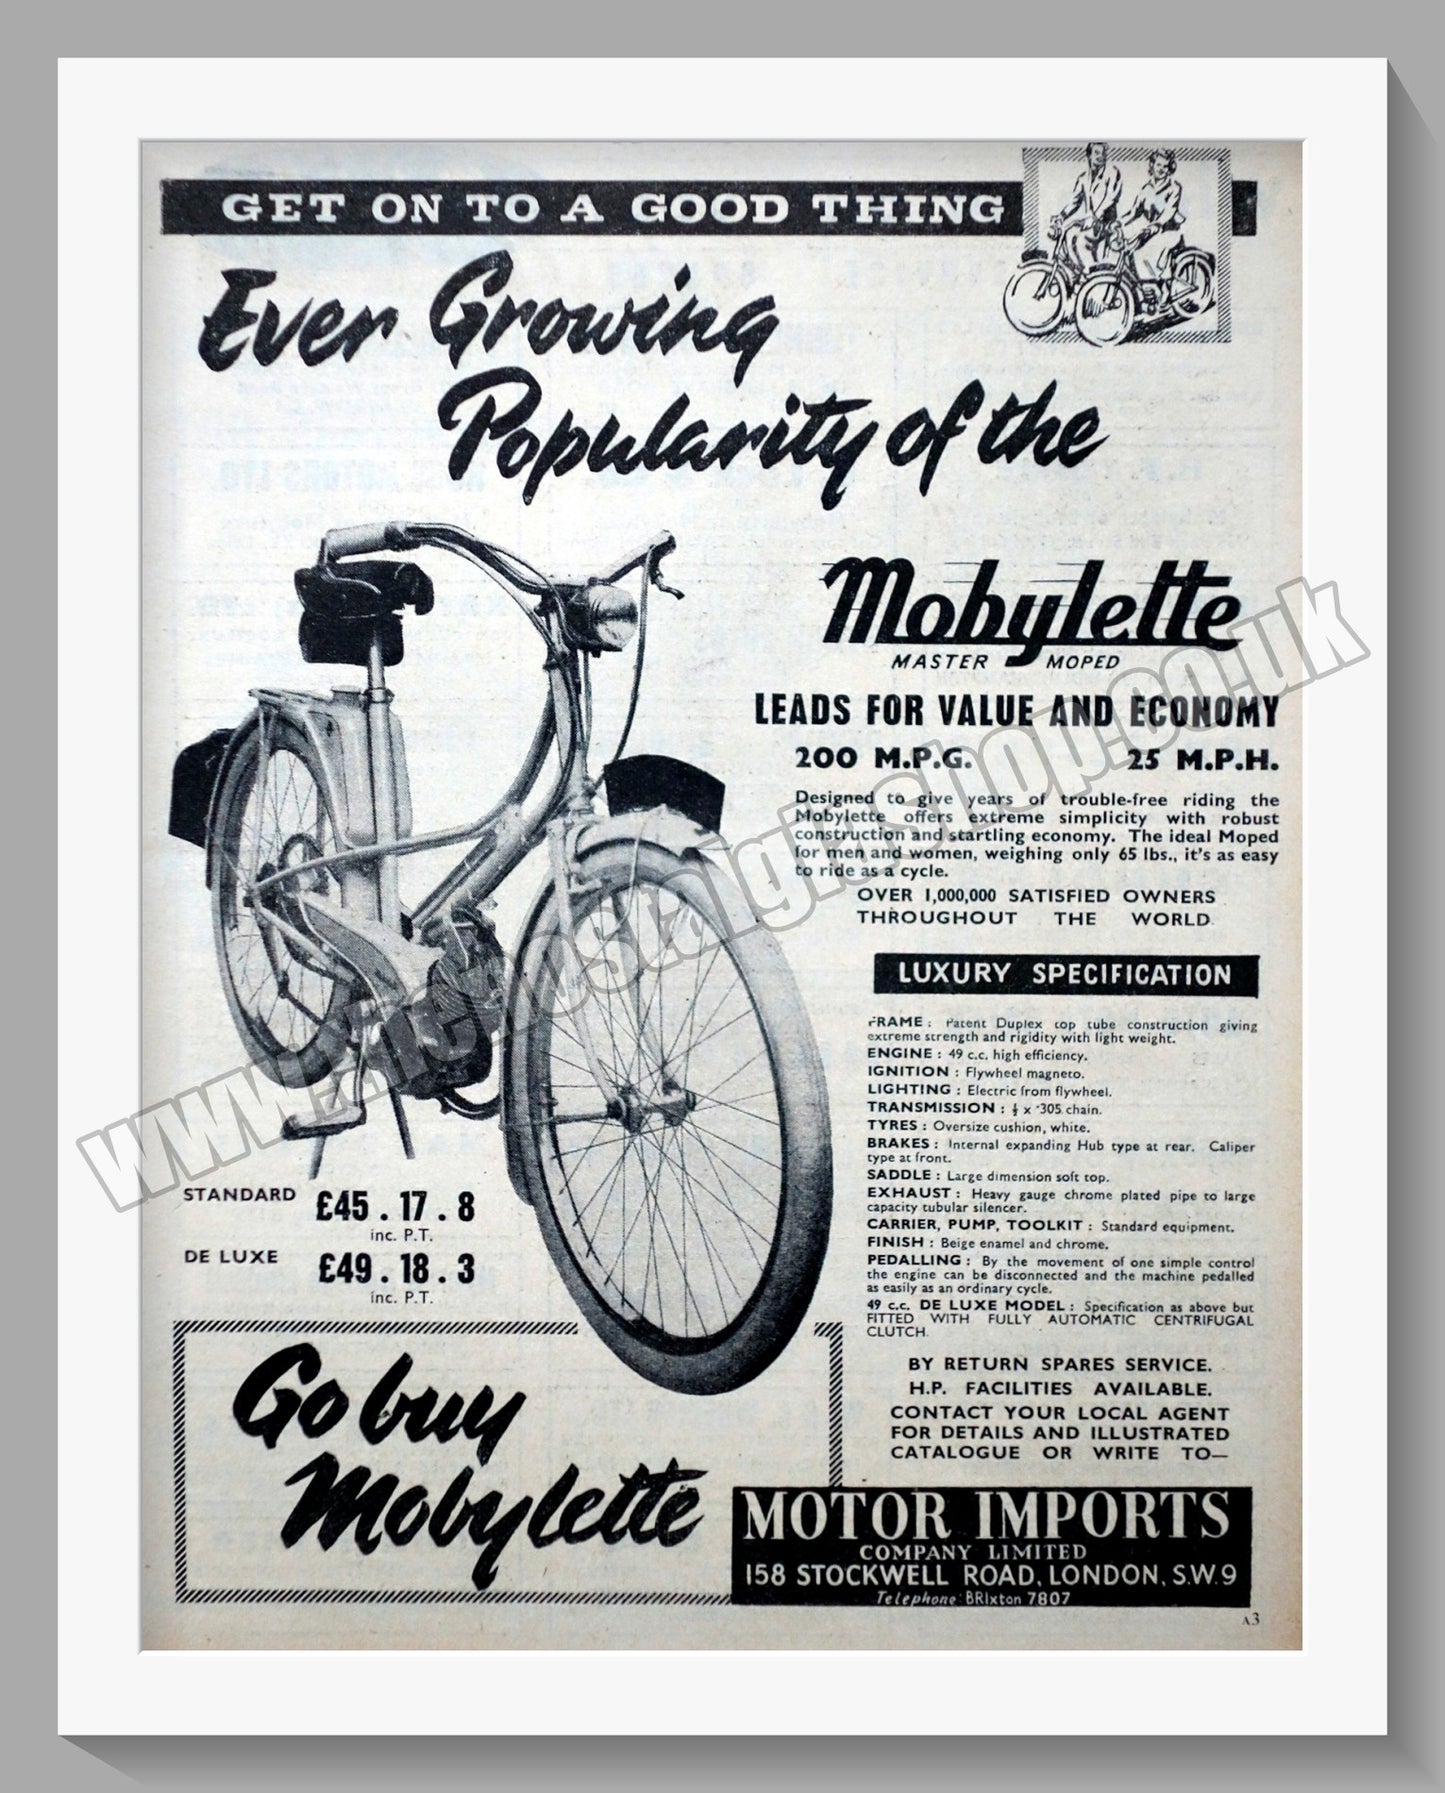 Mobylette Autocycle, Moped. 1956 Original Advert (ref AD57615)